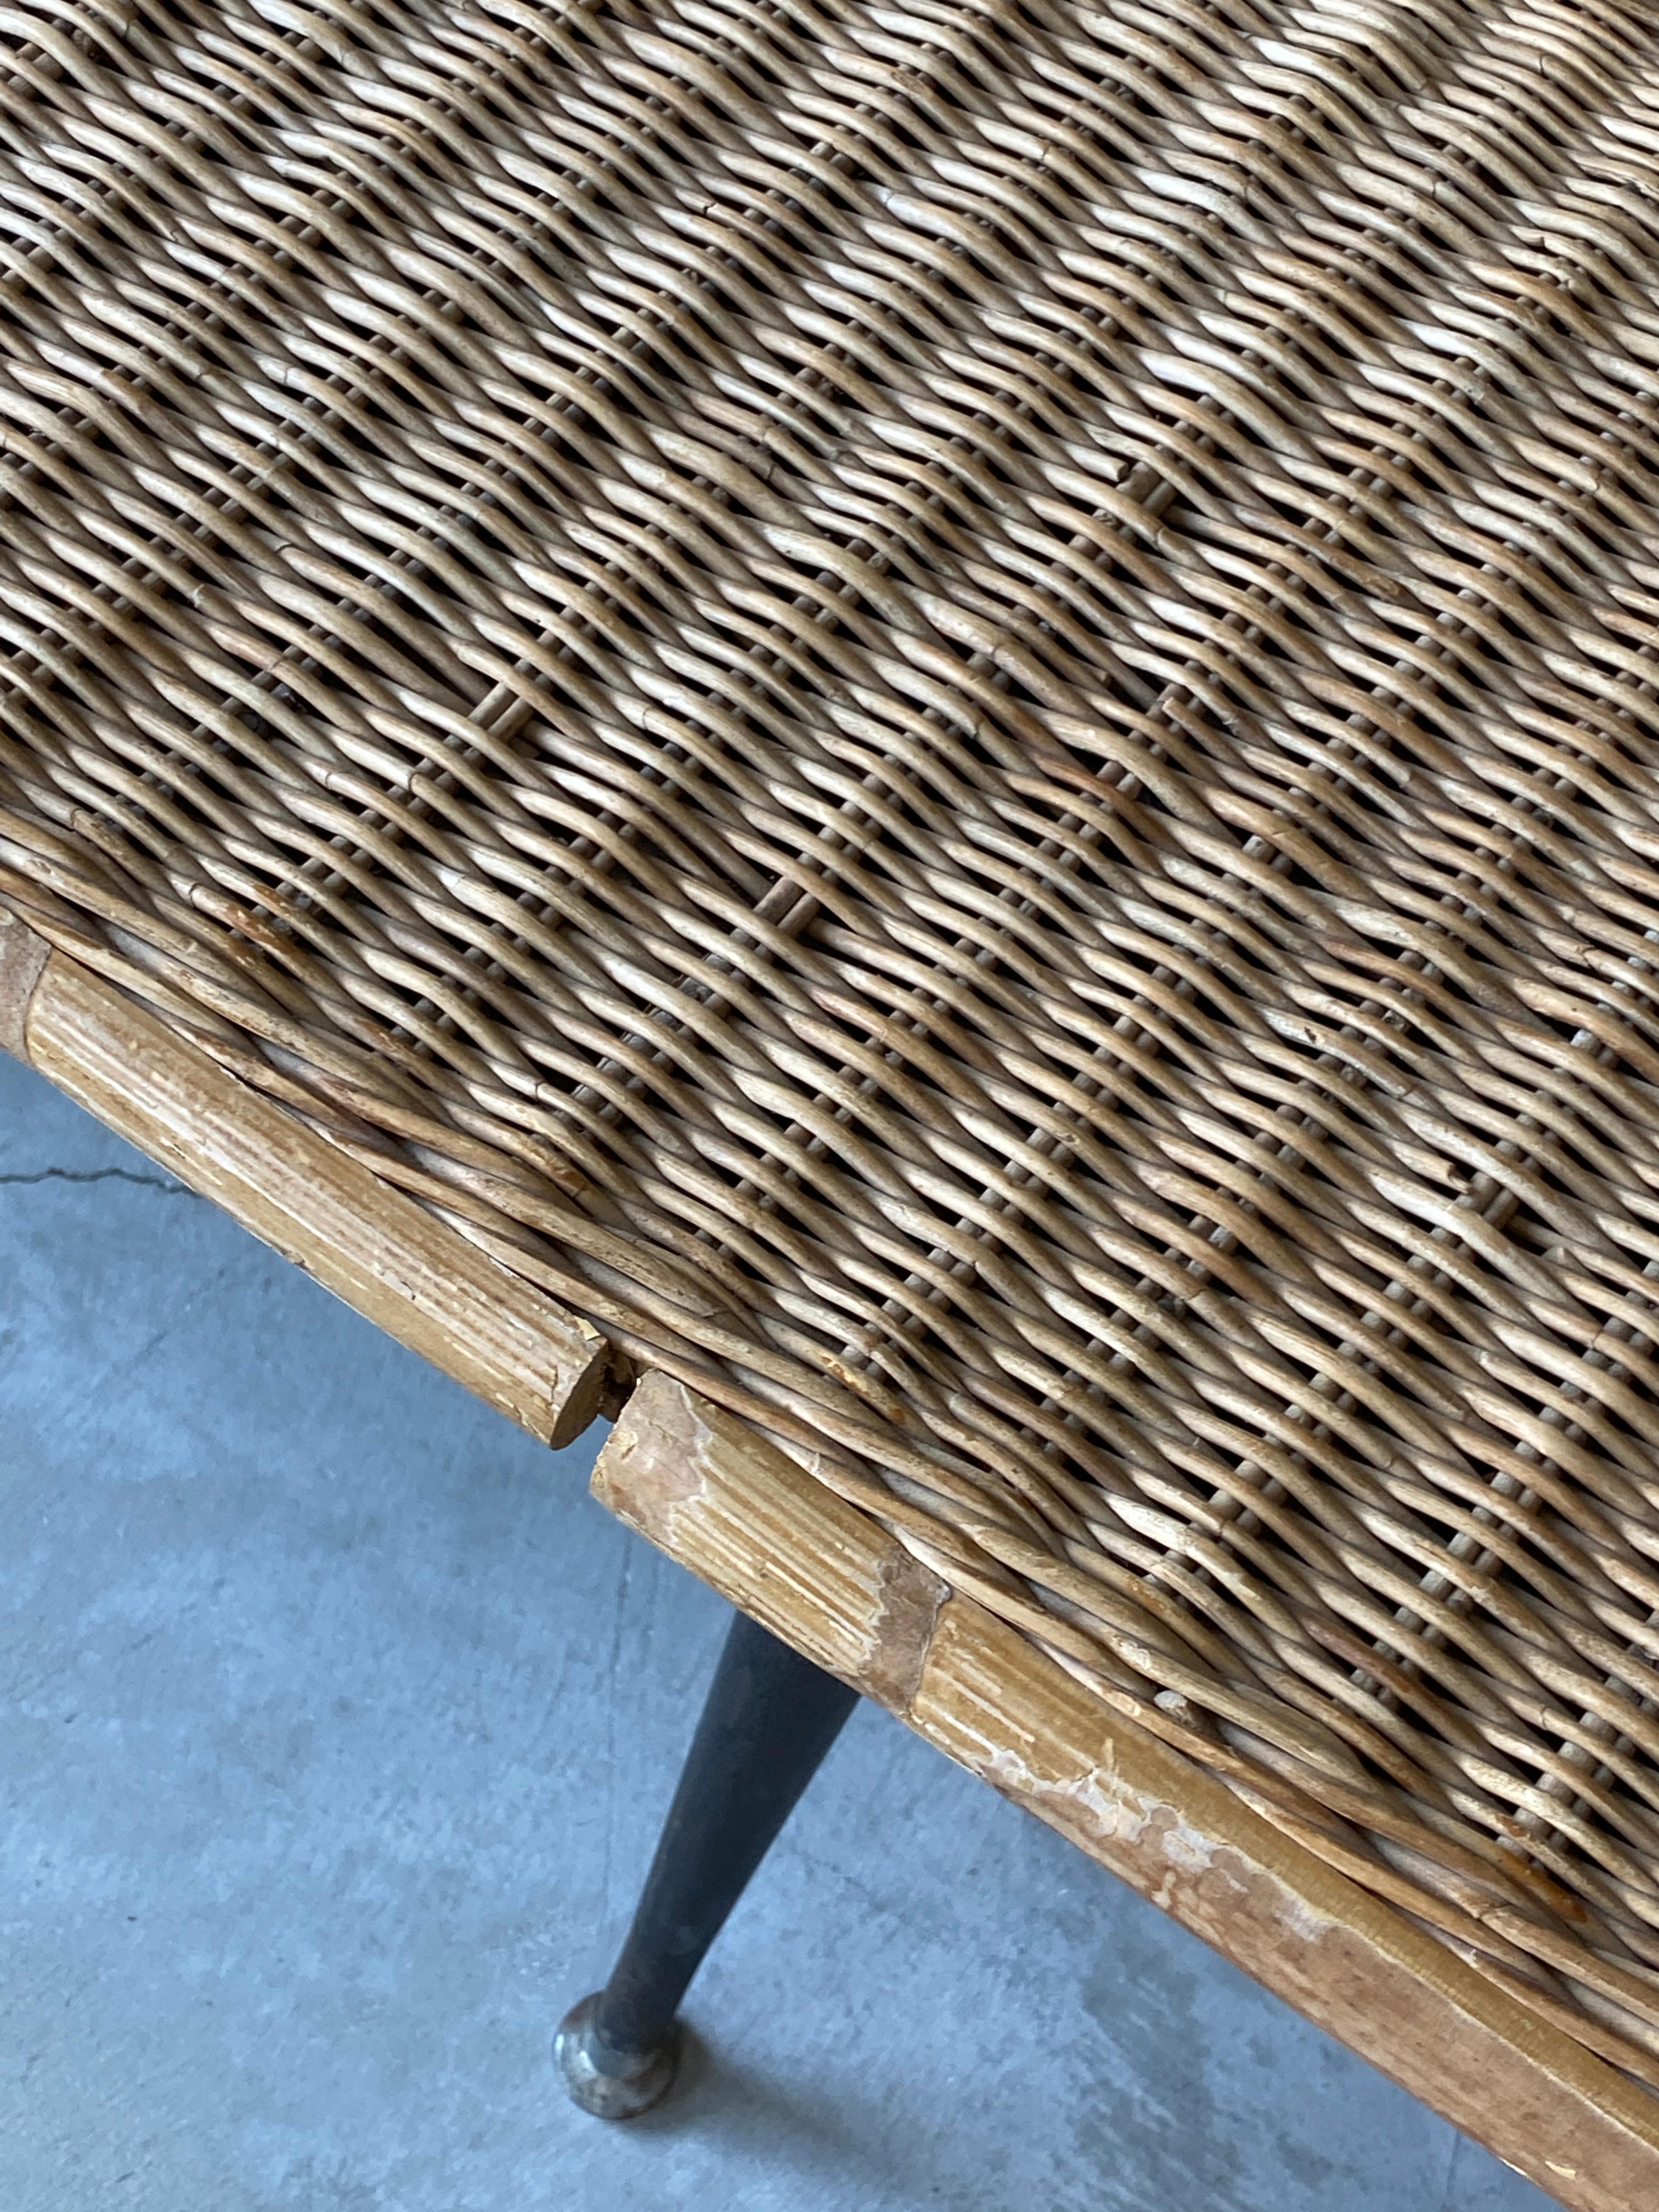 Mid-20th Century American Designer, Minimalist Bench, Woven Rattan, Bamboo, Lacquered Steel 1950s